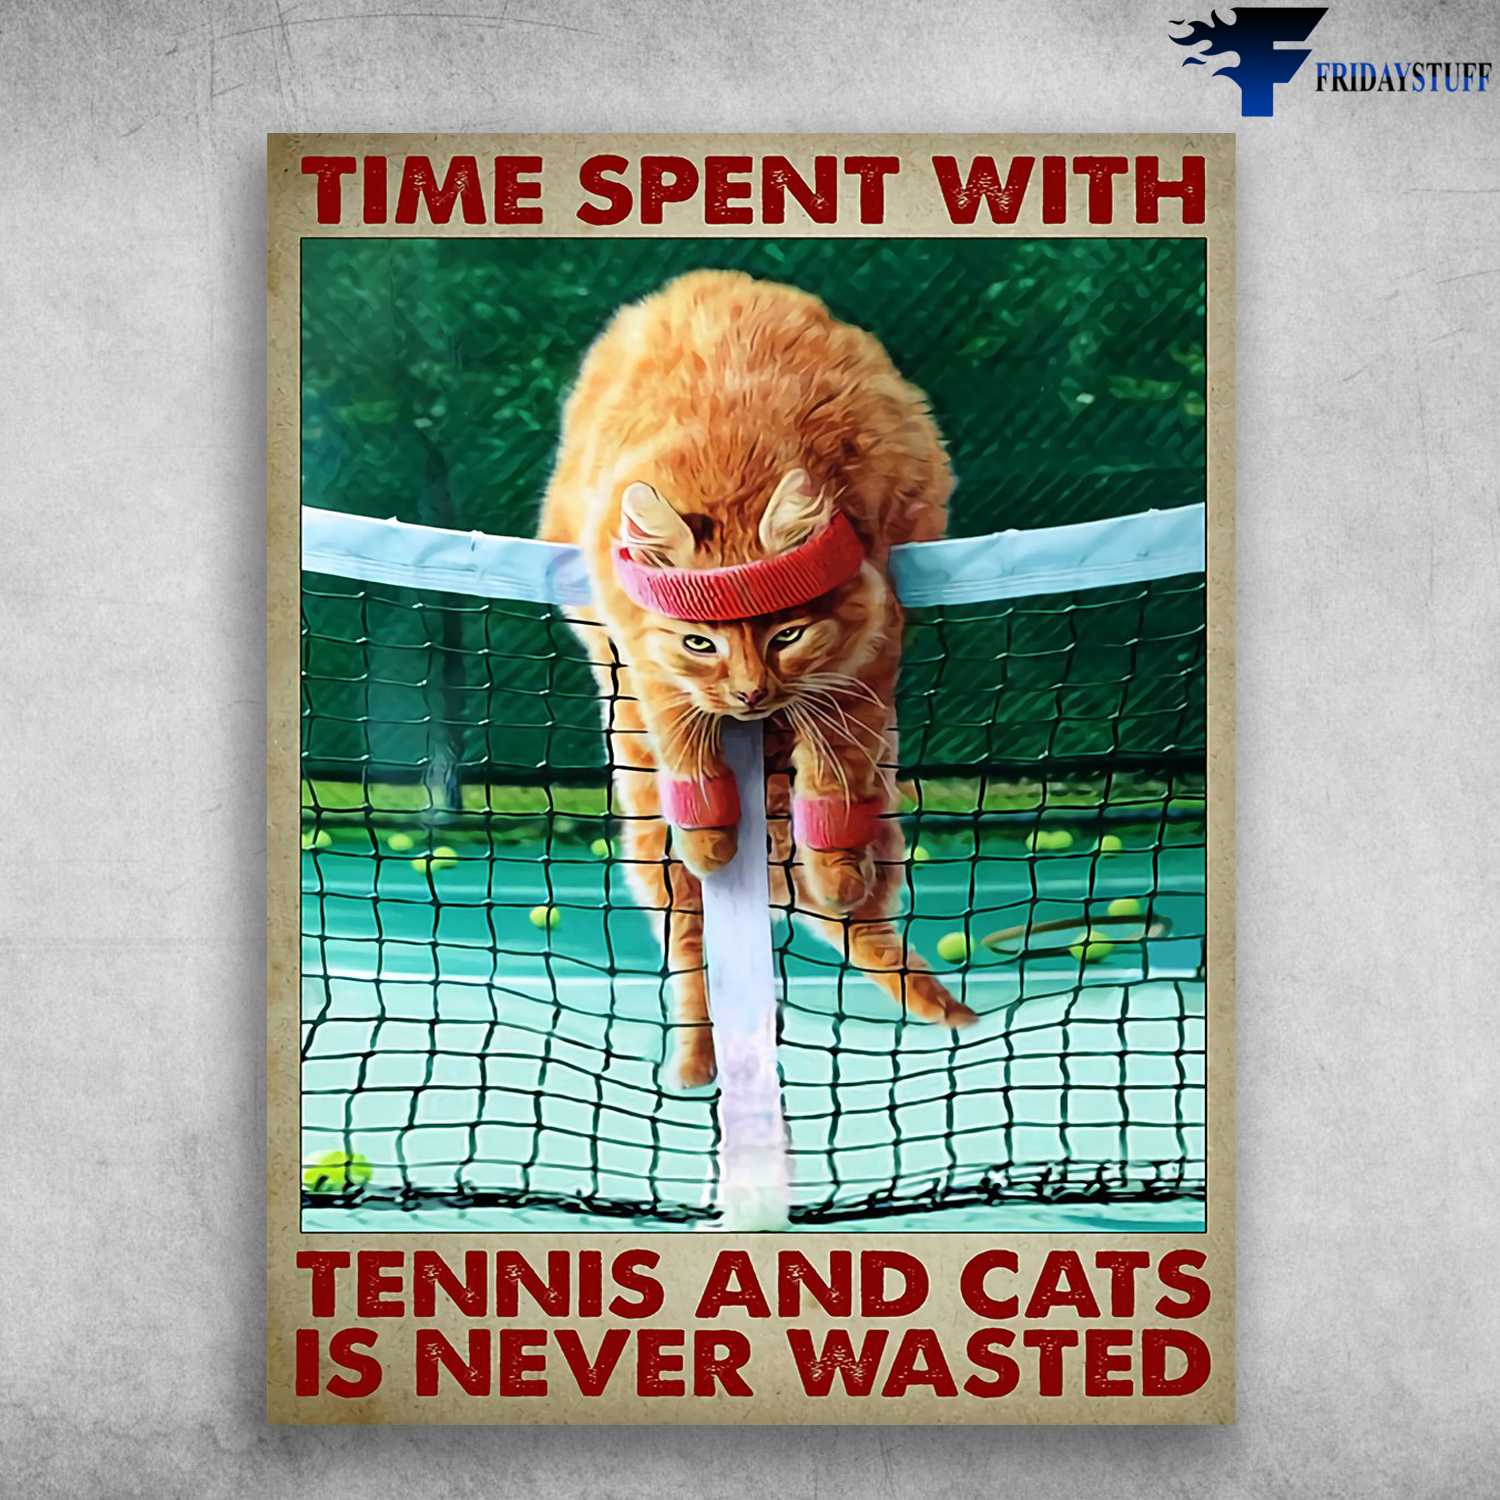 Tennis Cat, Cat Lover - Time Spent With, Tennis And Cats, Is Never Wasted